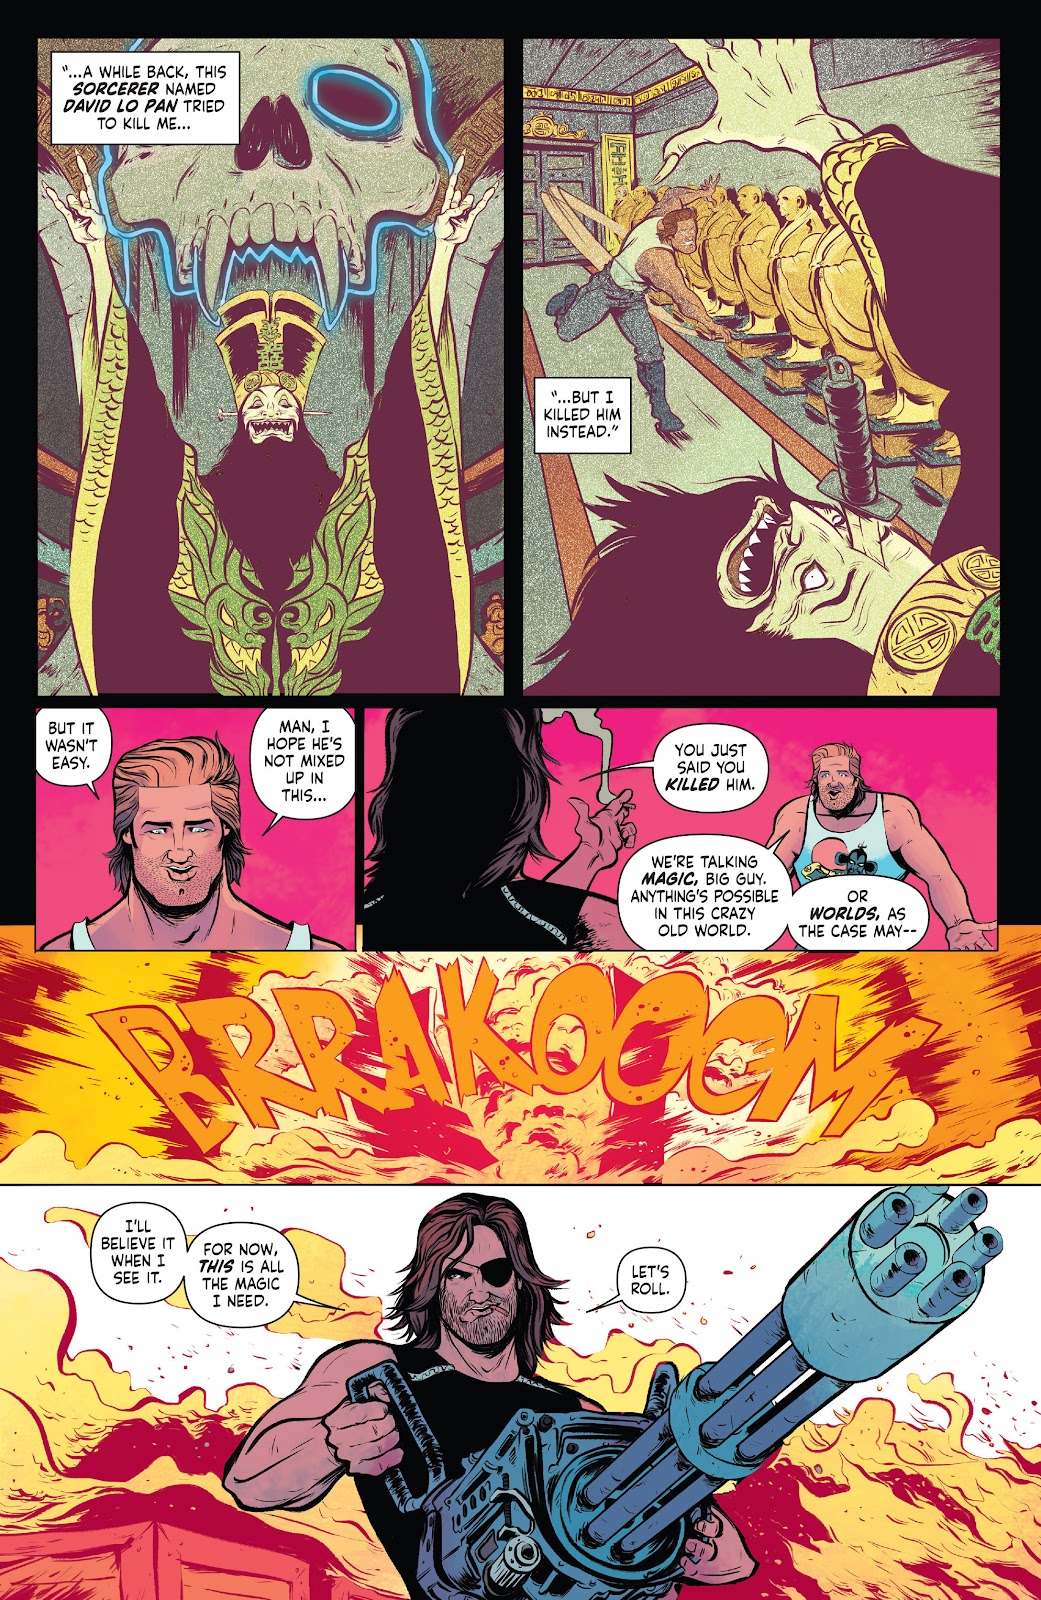 Big Trouble in Little China / Escape from New York issue 2 - Page 5